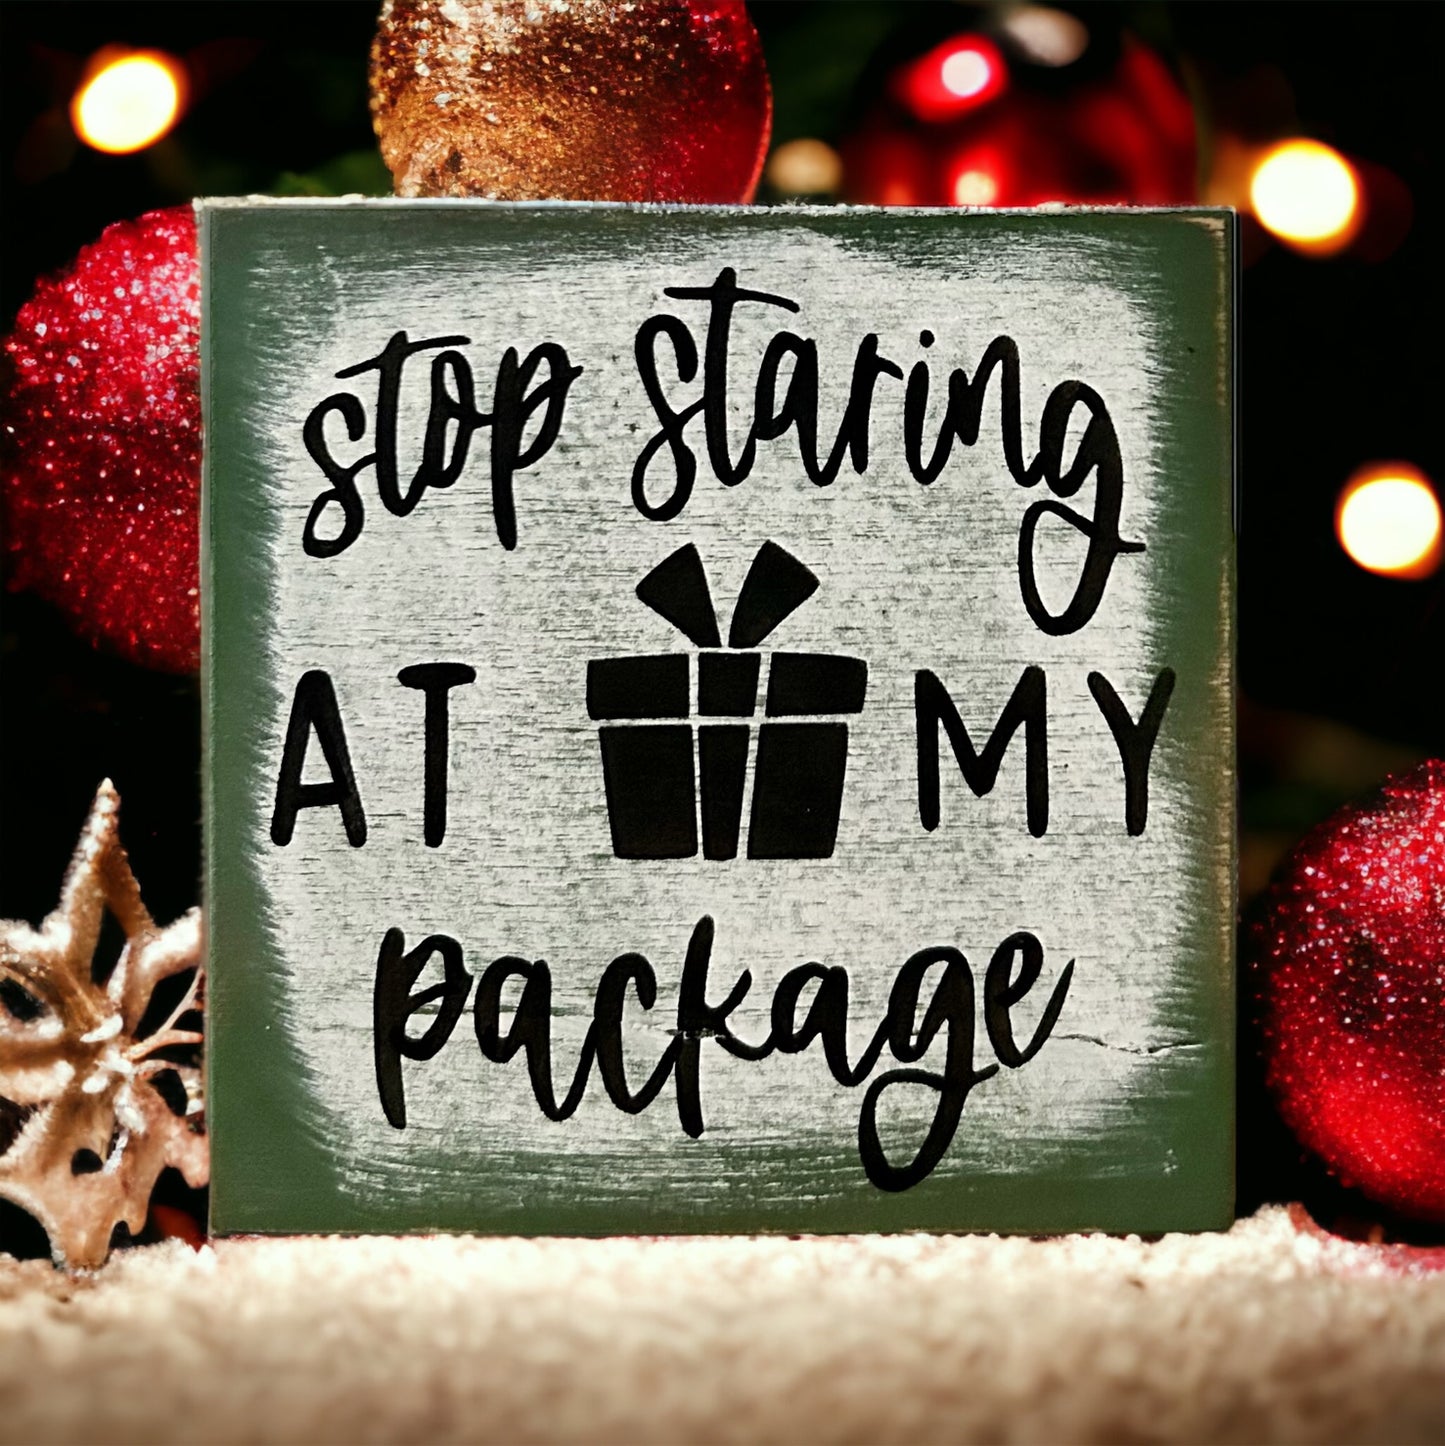 "staring at my package" wood sign